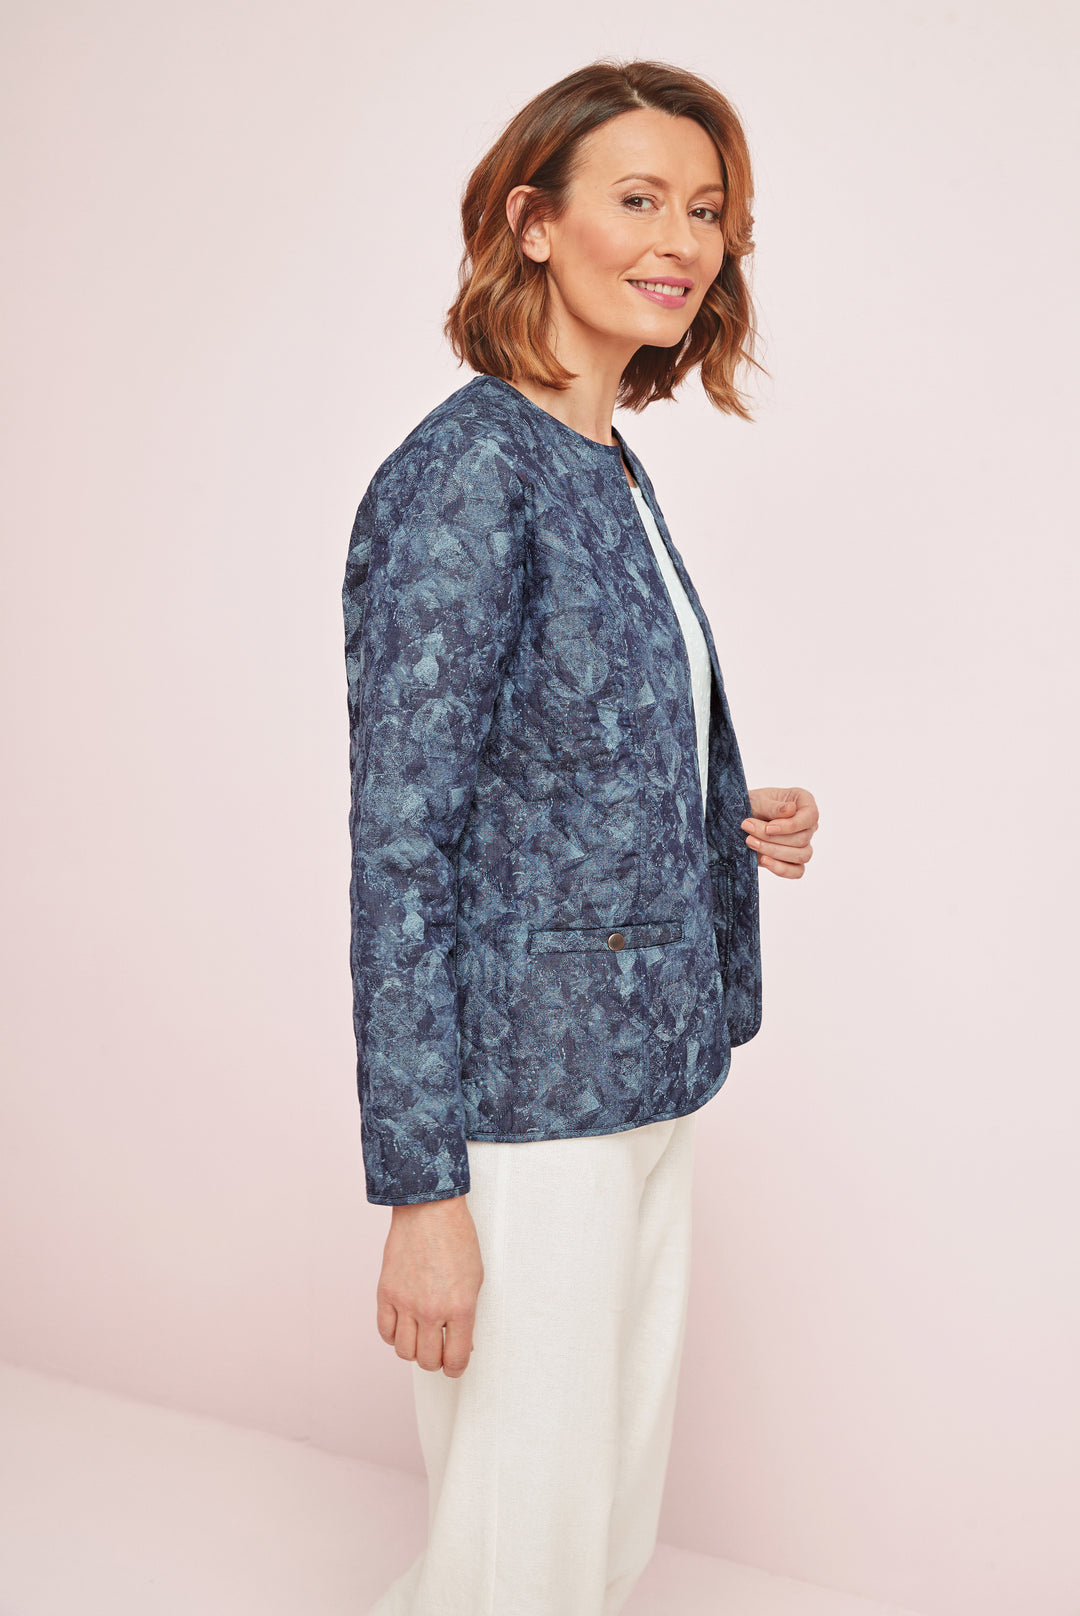 Lily Ella Collection stylish navy floral patterned blazer for women paired with elegant white trousers, trendy and sophisticated office wear.